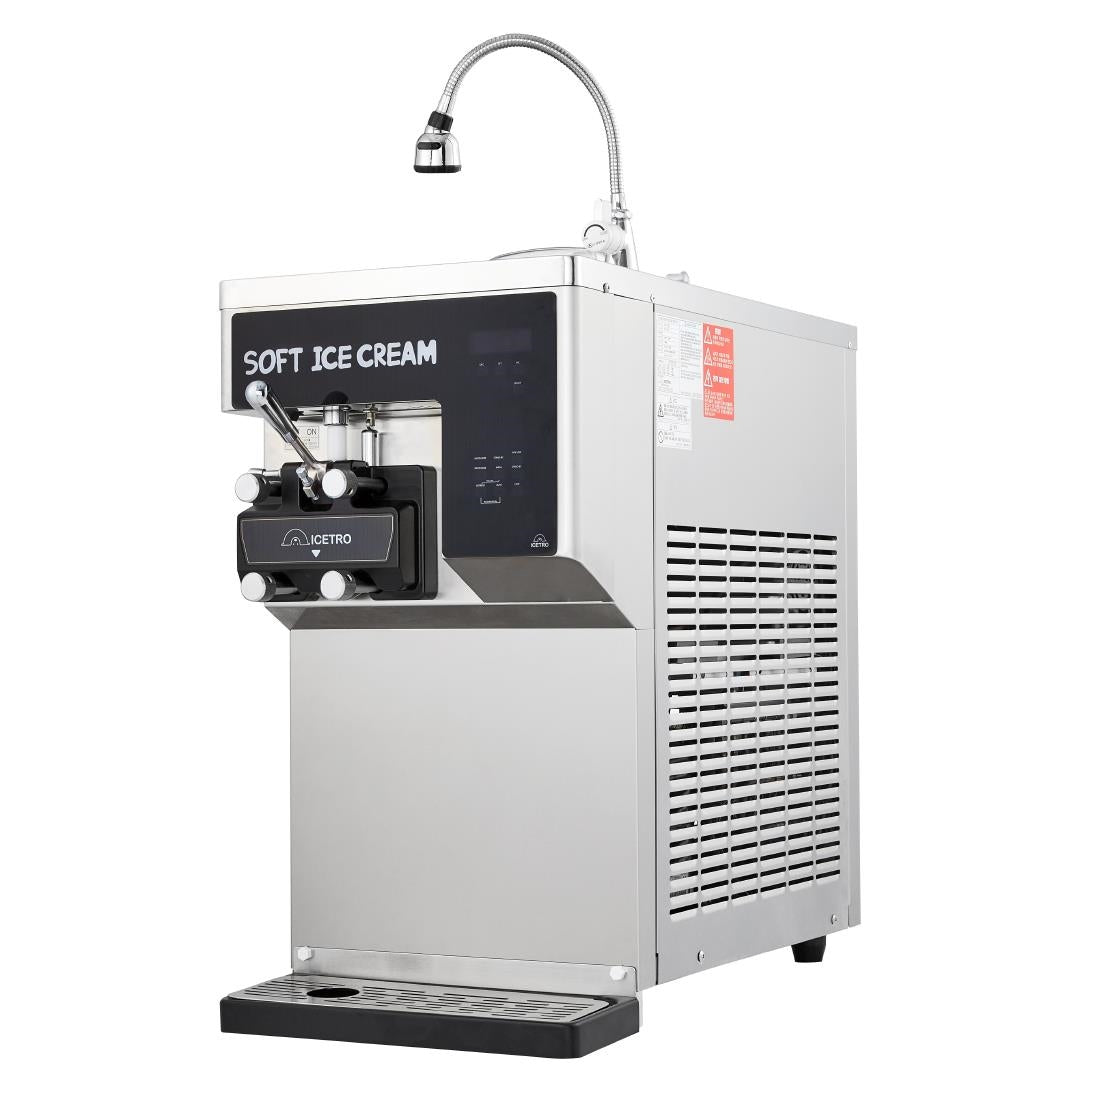 CU129 Icetro High Output Countertop Soft Ice Cream Machine ISI-301TH JD Catering Equipment Solutions Ltd